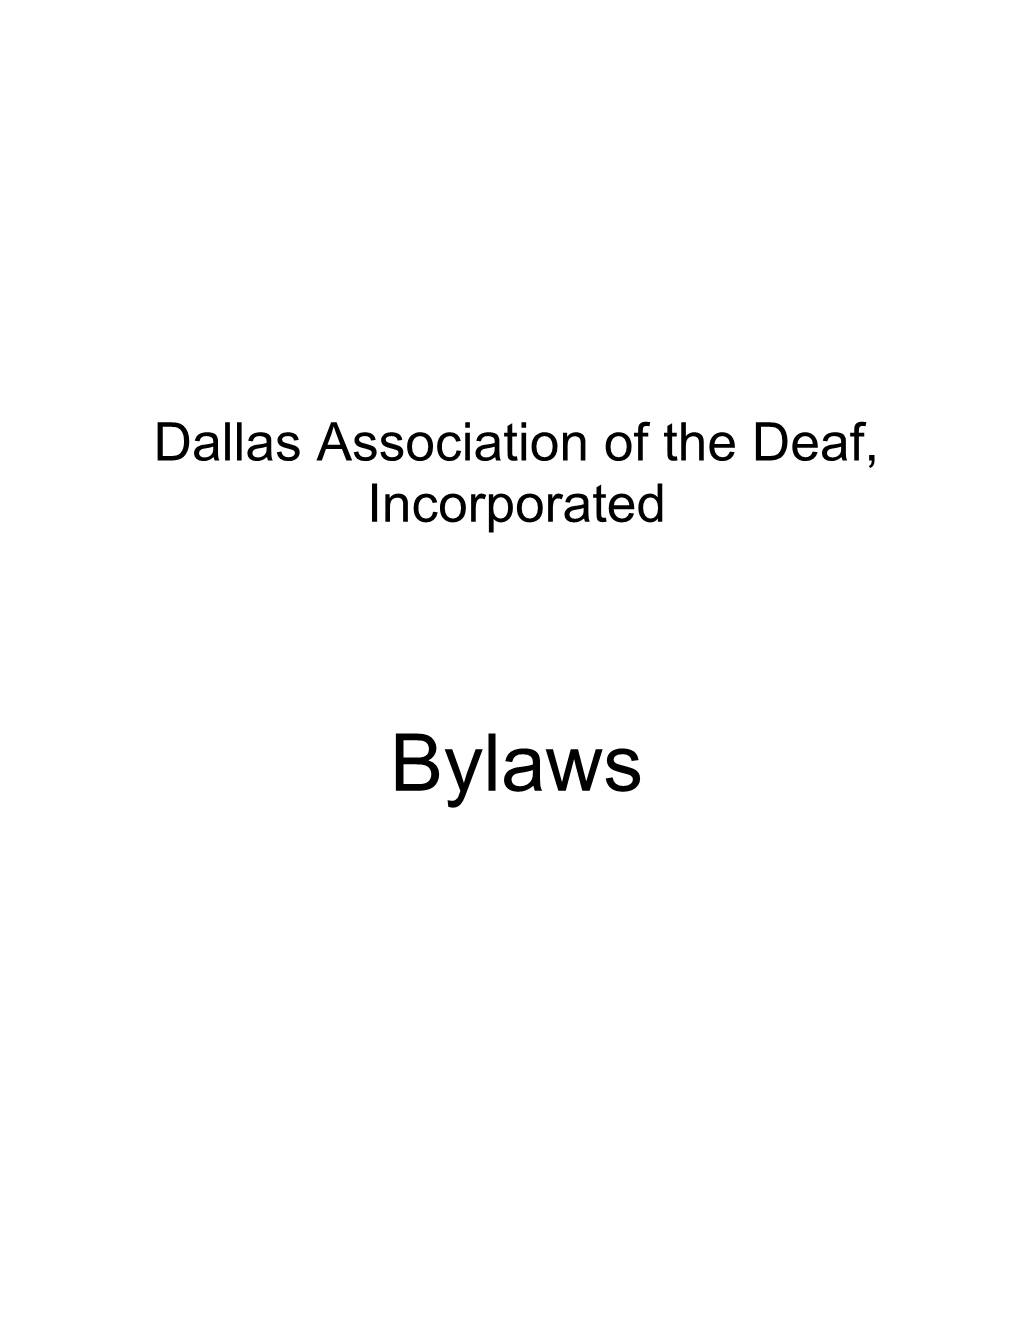 Dallas Association of the Deaf, Incorporated